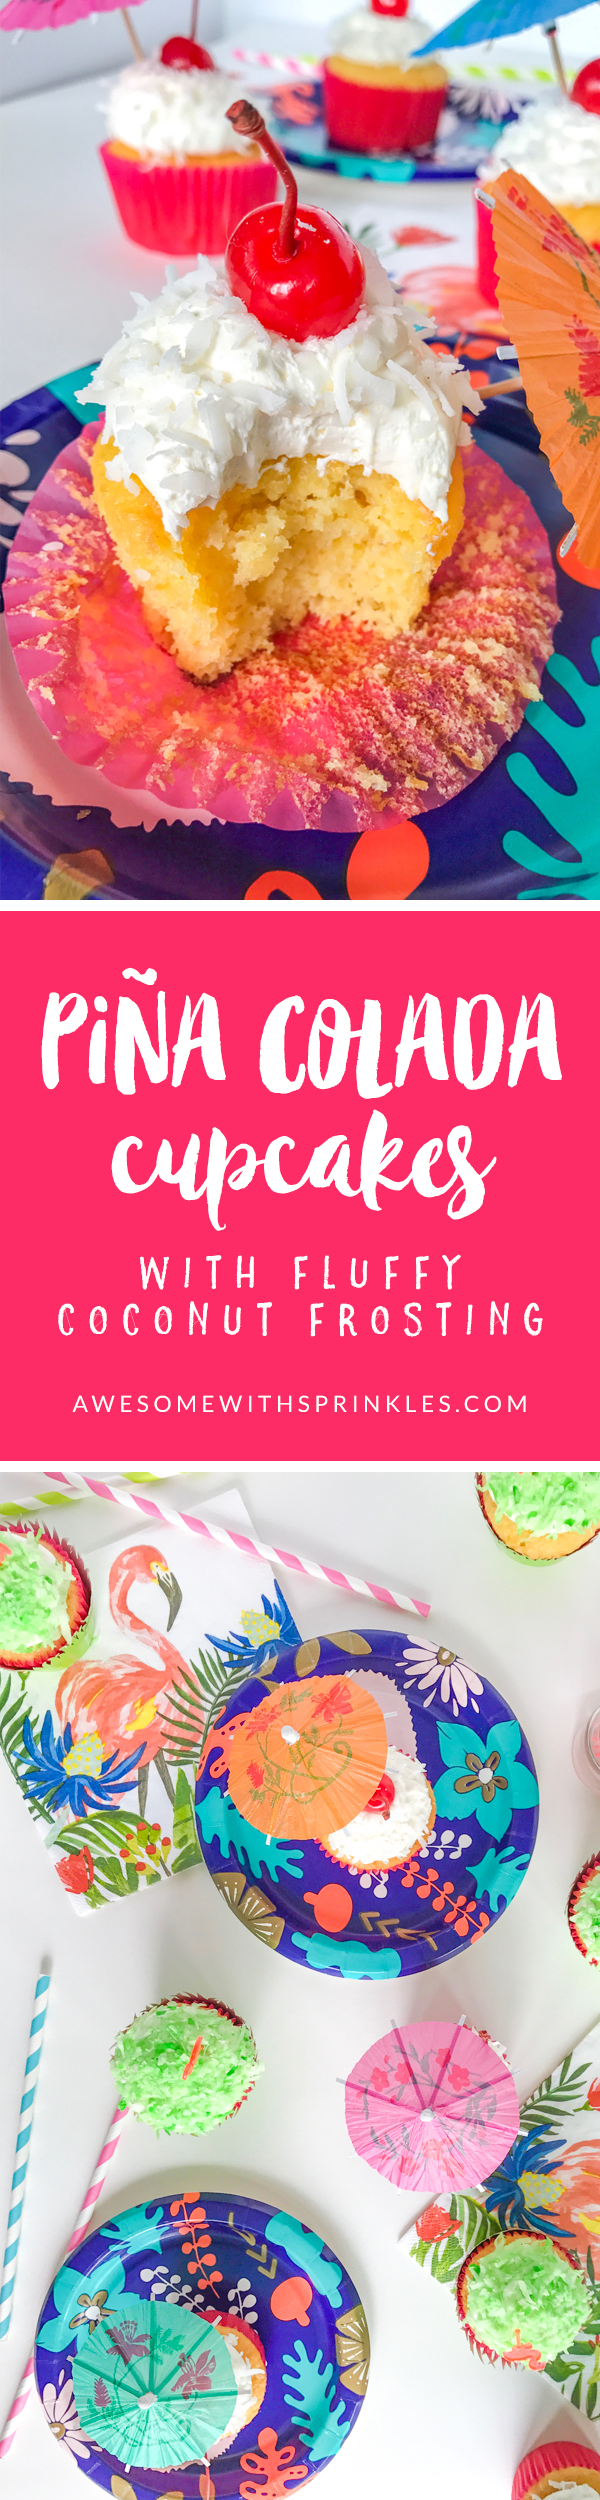 Piña Colada Cupcakes for a cute flamingo lawn party theme | Awesome with Sprinkles